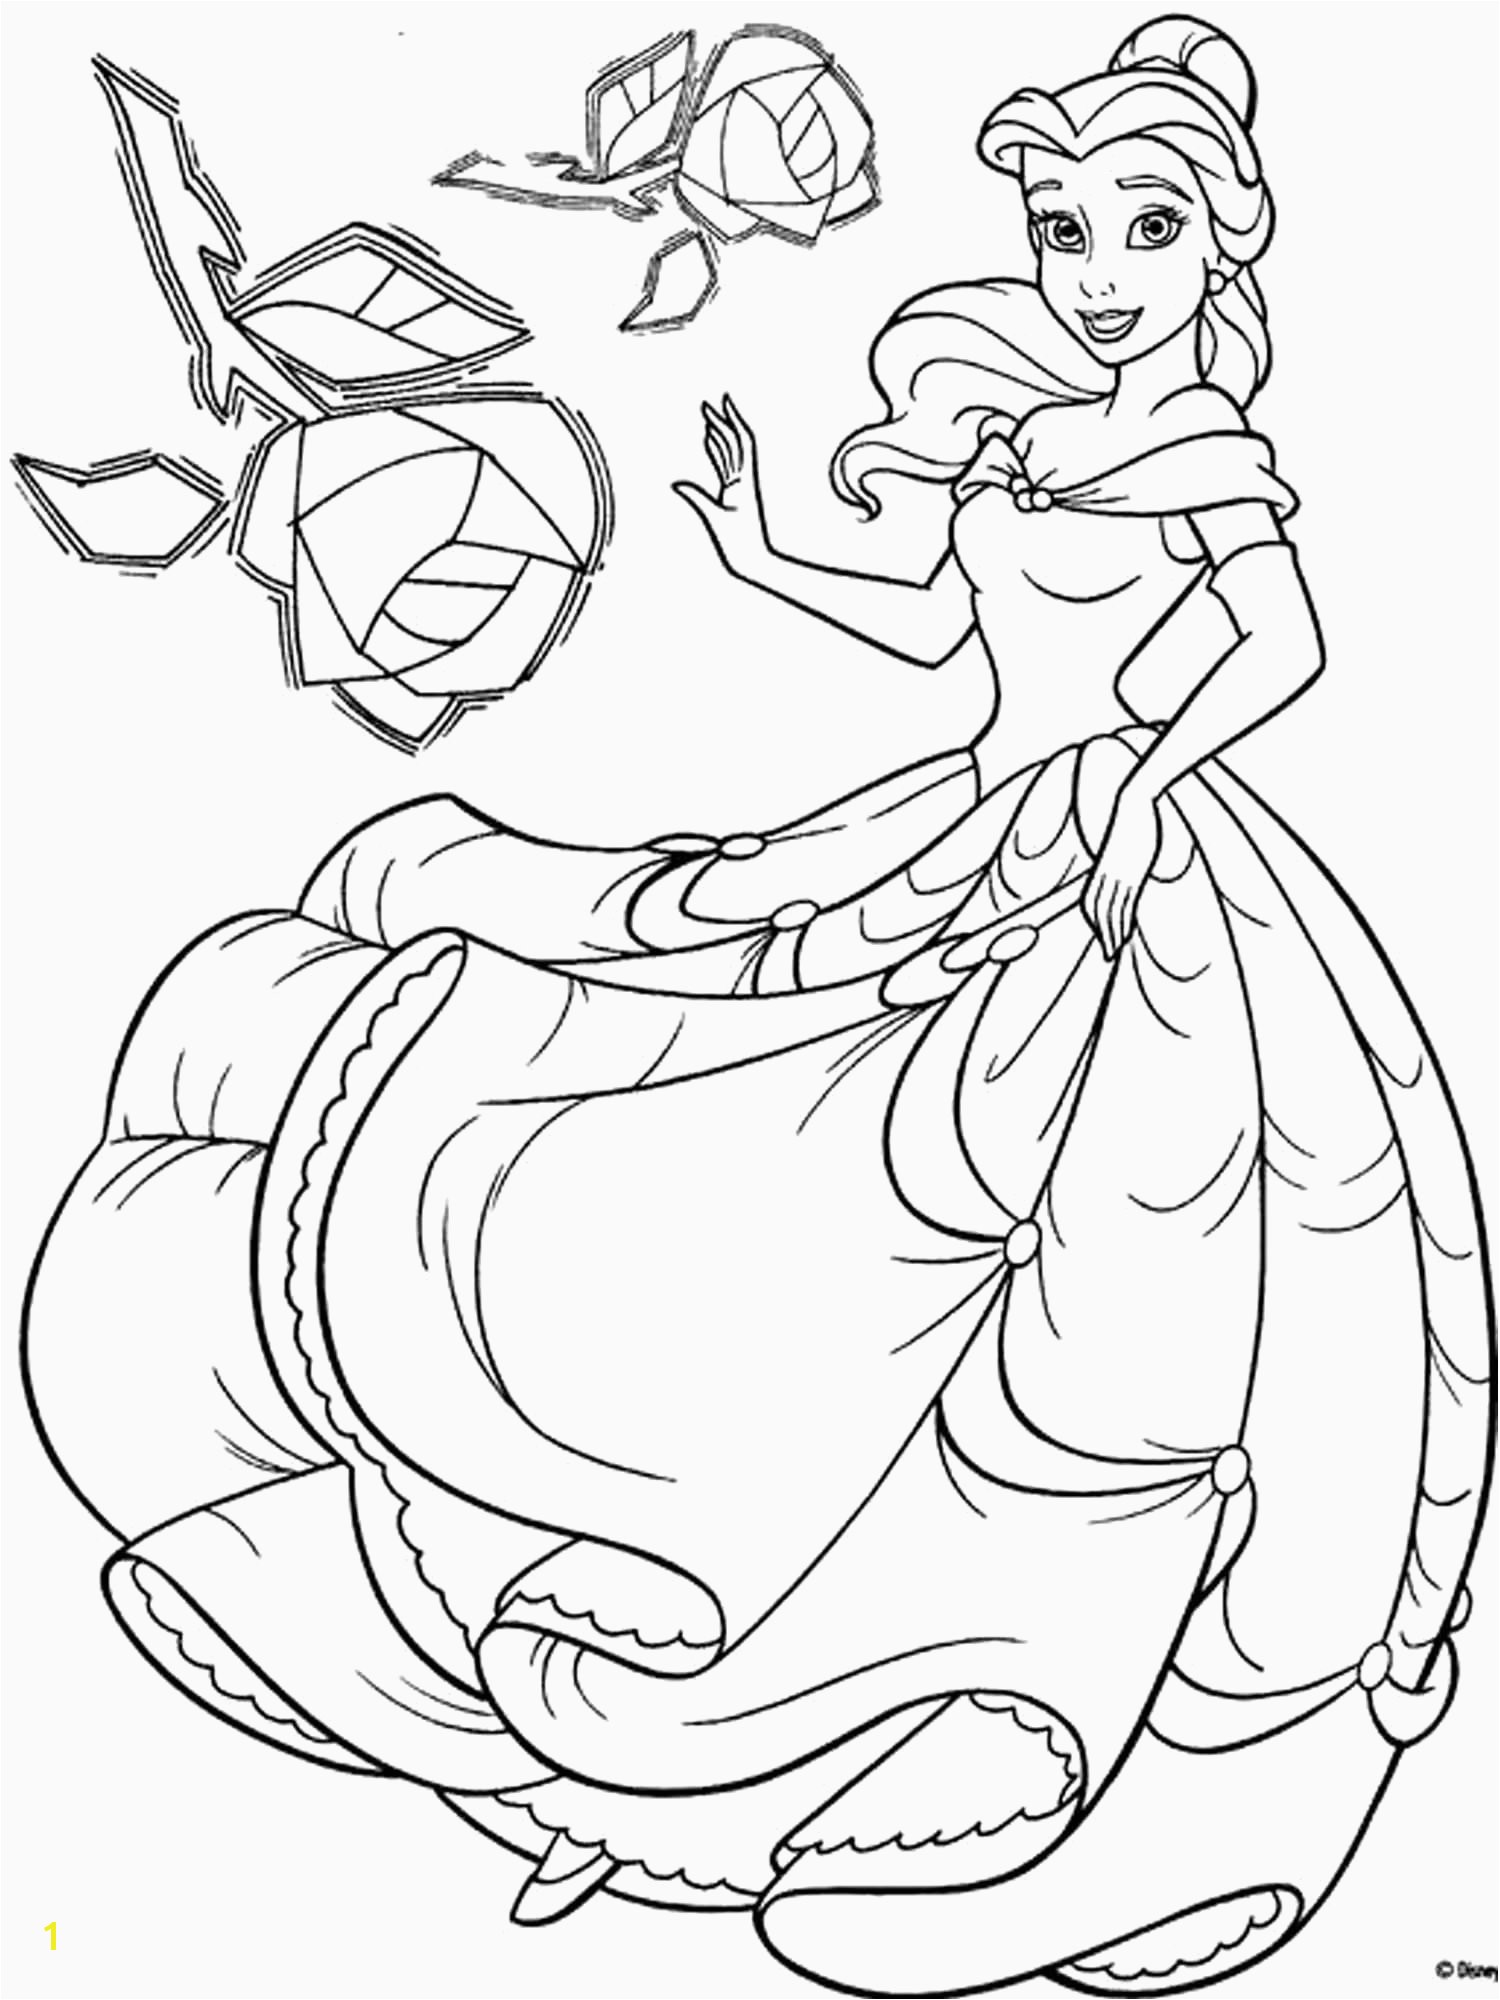 Coloring Pages Characters Lovely I Pinimg originals 92 1f 0d 921f0dd211b50f0e4e Beauty and the Beast